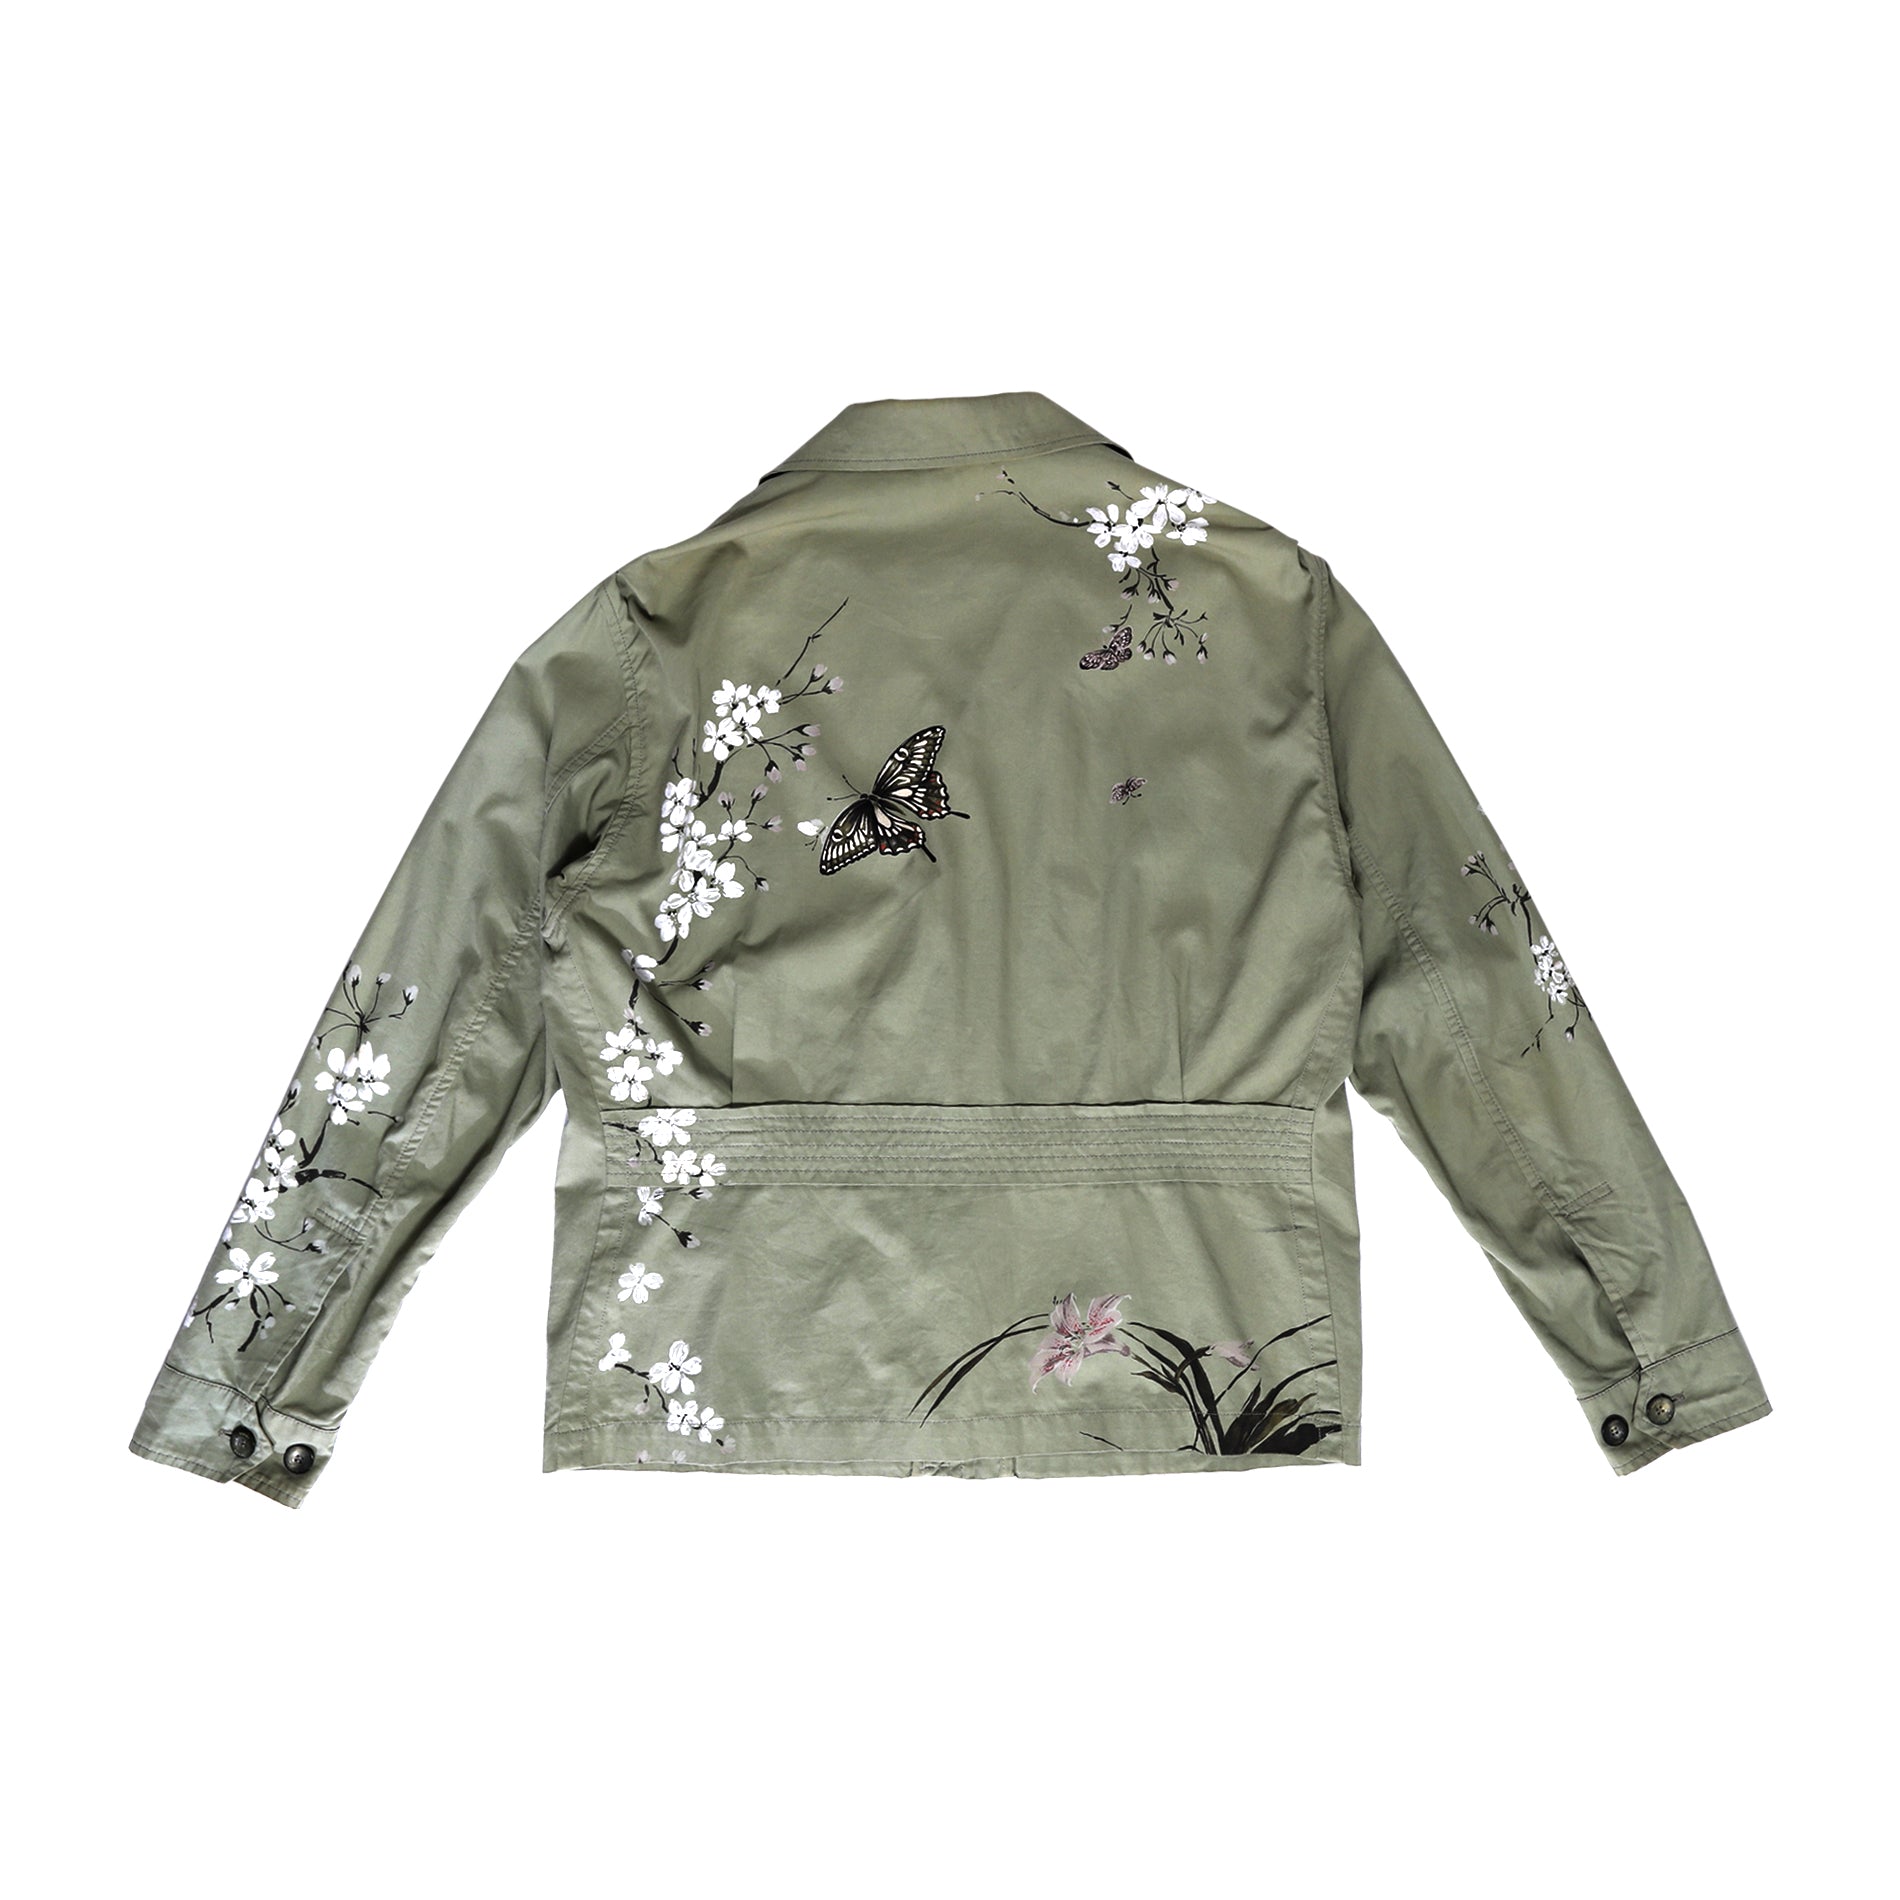 Gucci SS03 by Tom Ford Hand Painted Floral Jacket